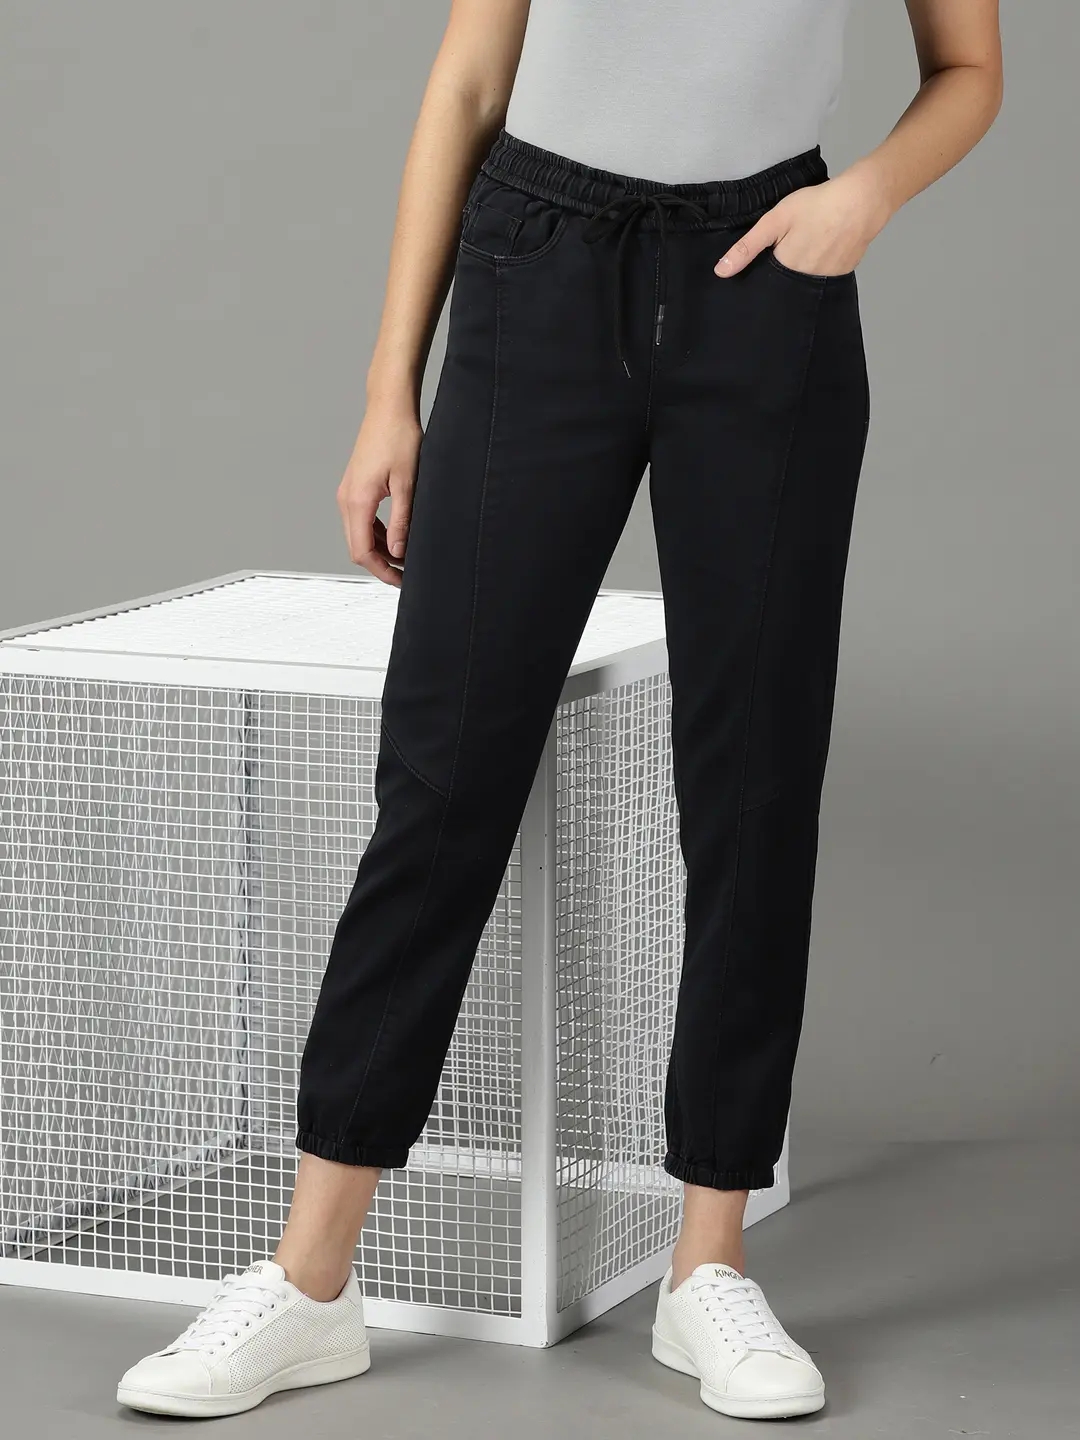 Showoff | SHOWOFF Women's Stretchable Clean Look Black Jogger Jeans